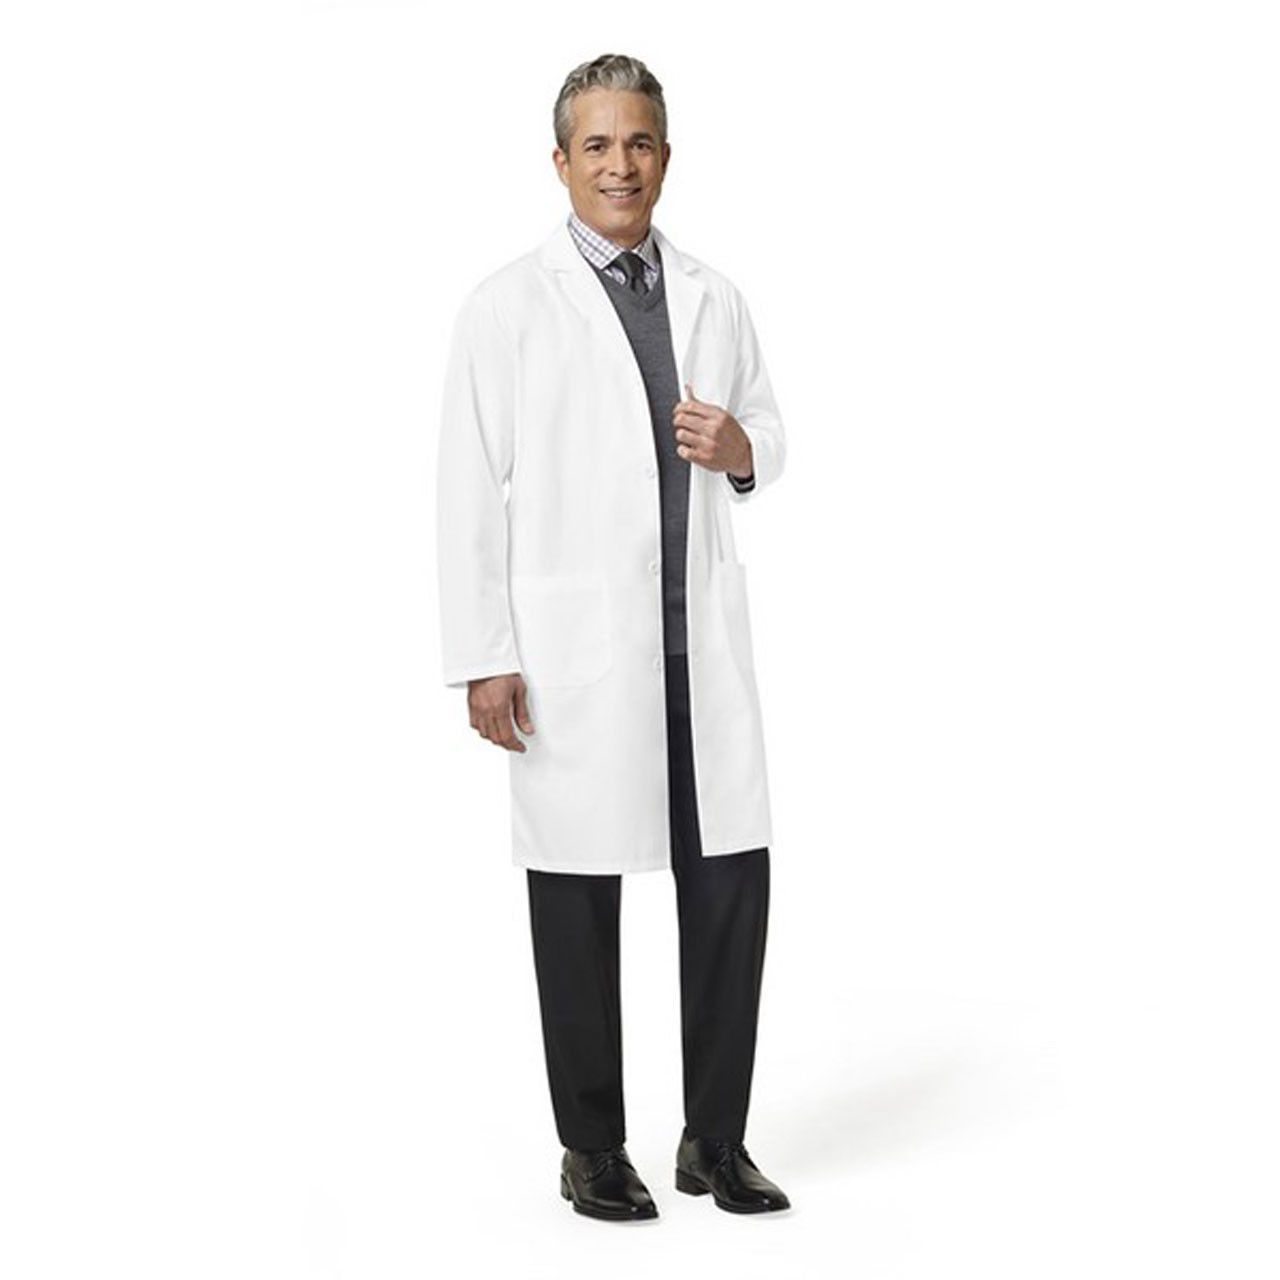 What color is the cotton lab coat I want to purchase?